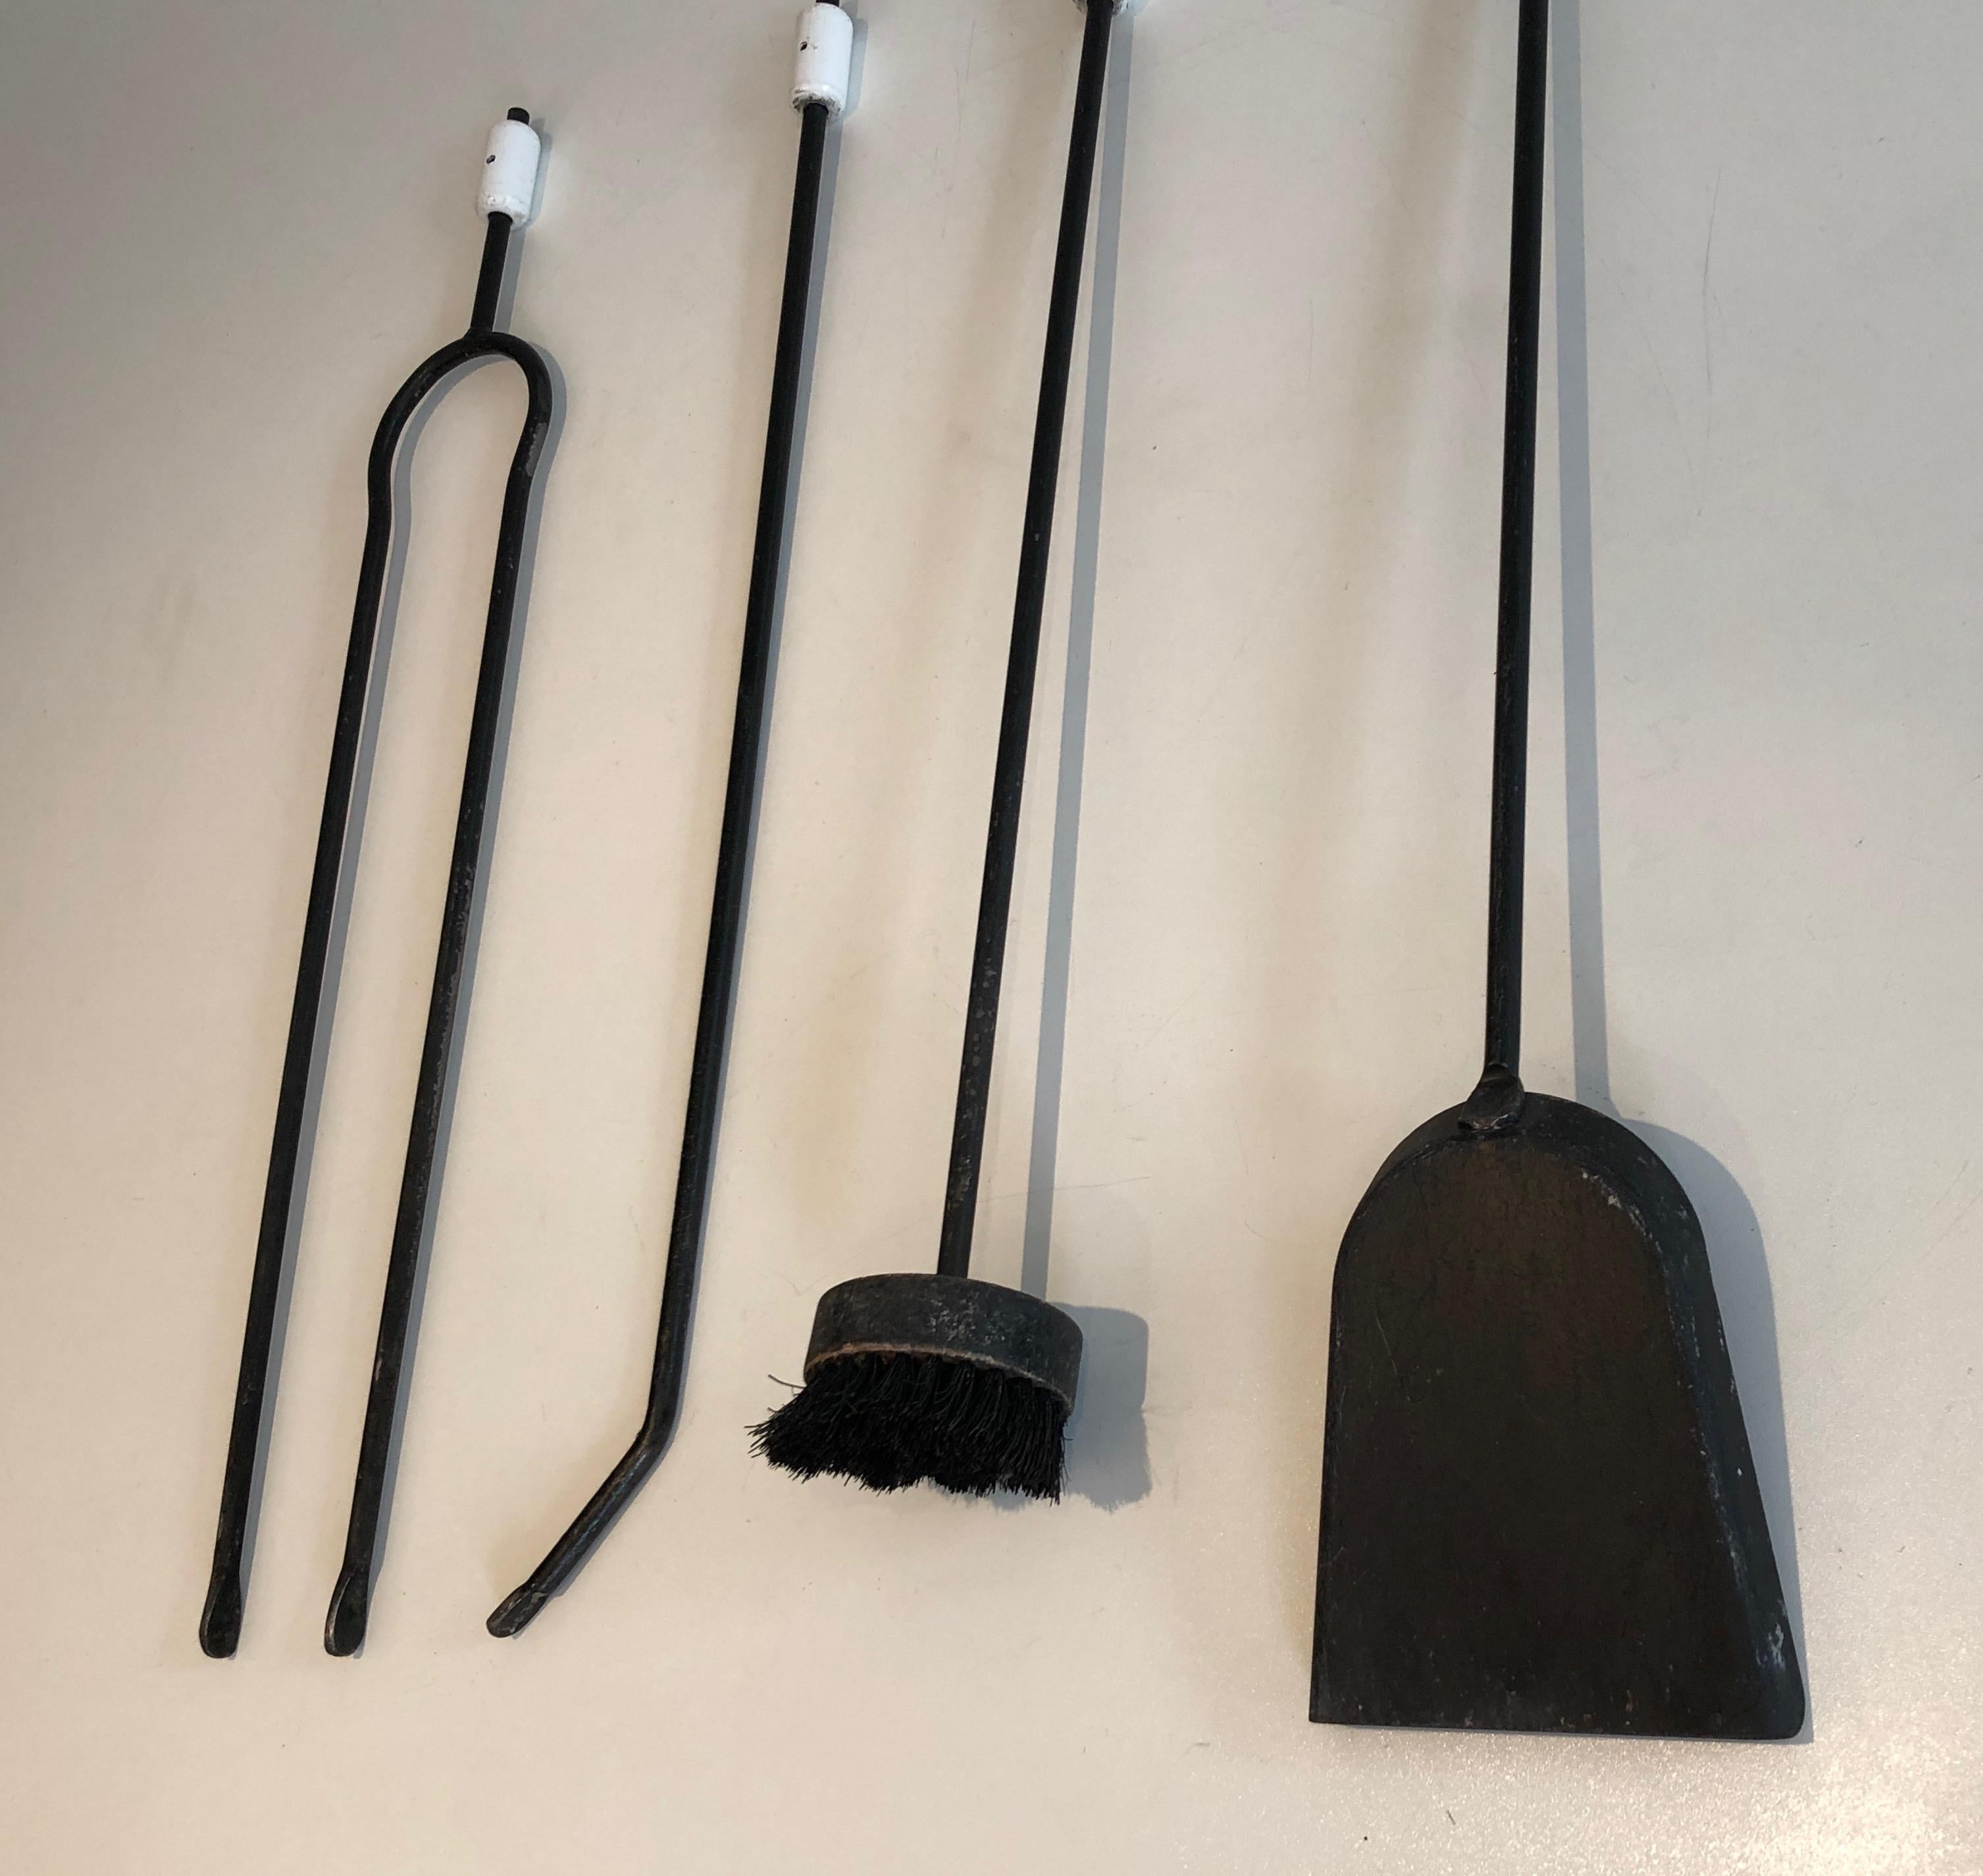 Black and White Lacquered Design Fire Place Tools on Stand, French, Circa 1980 For Sale 7